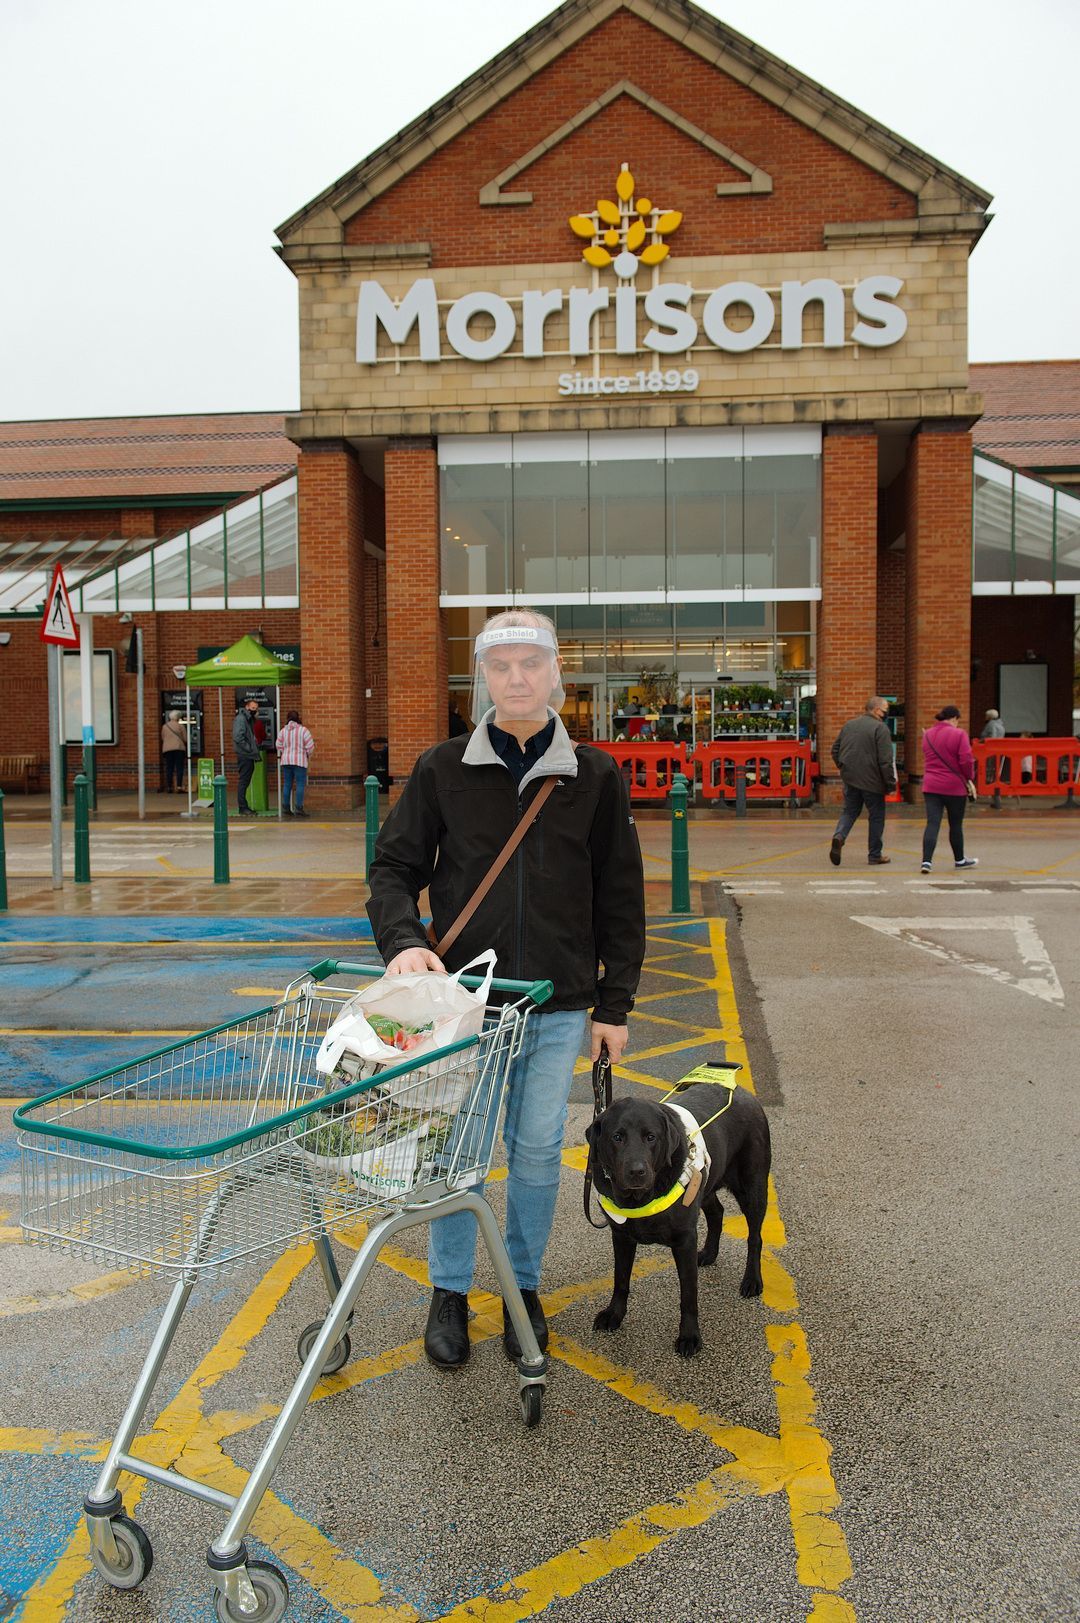 Philip Anderson stands outside Morrisons with his guide dog, pushing a shopping trolley.